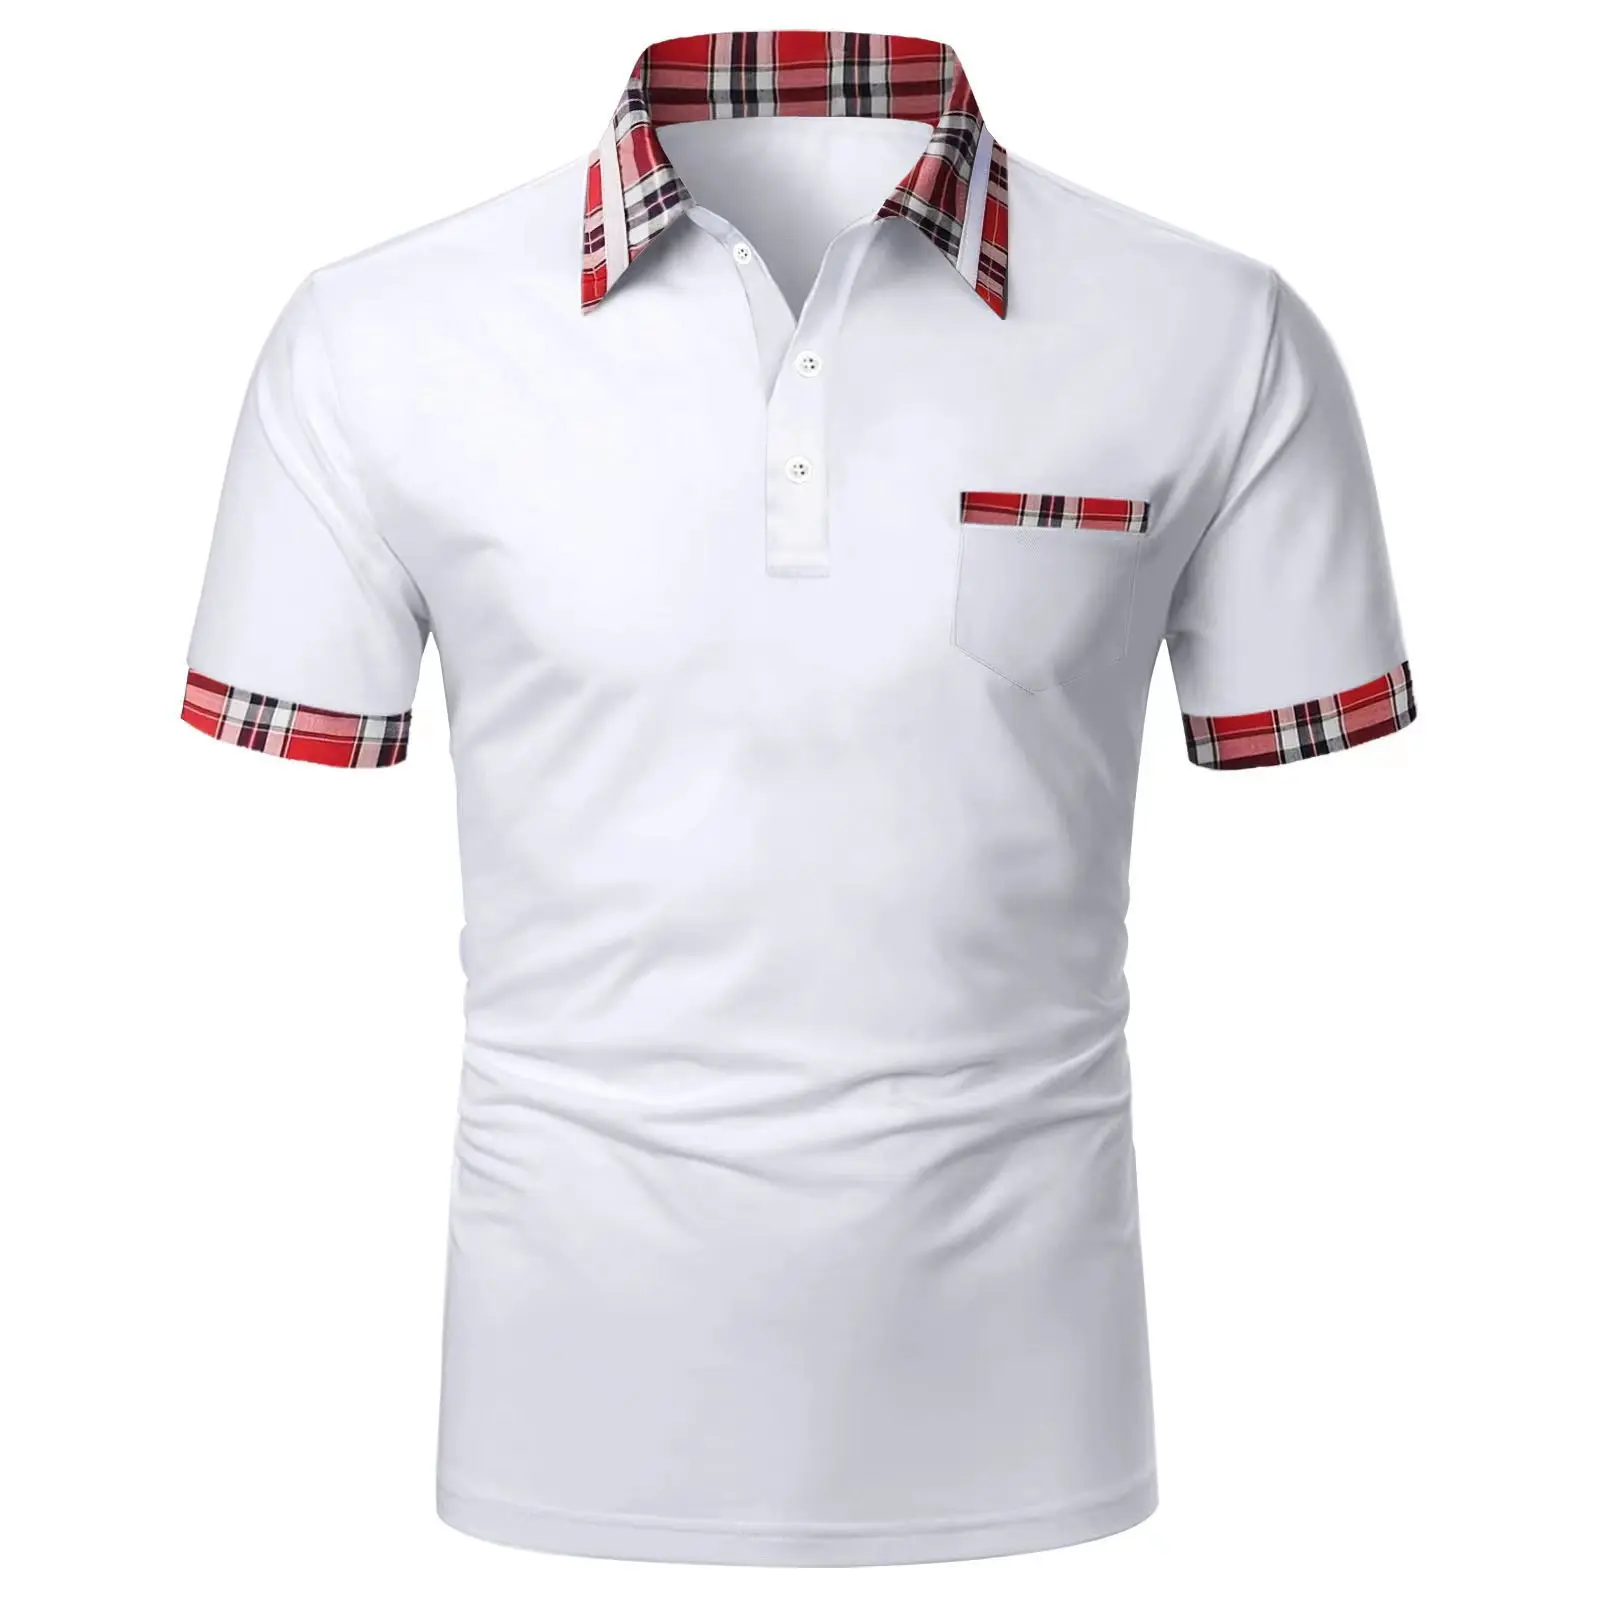 

Business Polo Shirt Men Plaid patchwork Summer Casual Tee Loose Breathable Anti-wrinkle Short Sleeved Male Polos Shirt Tops 2023